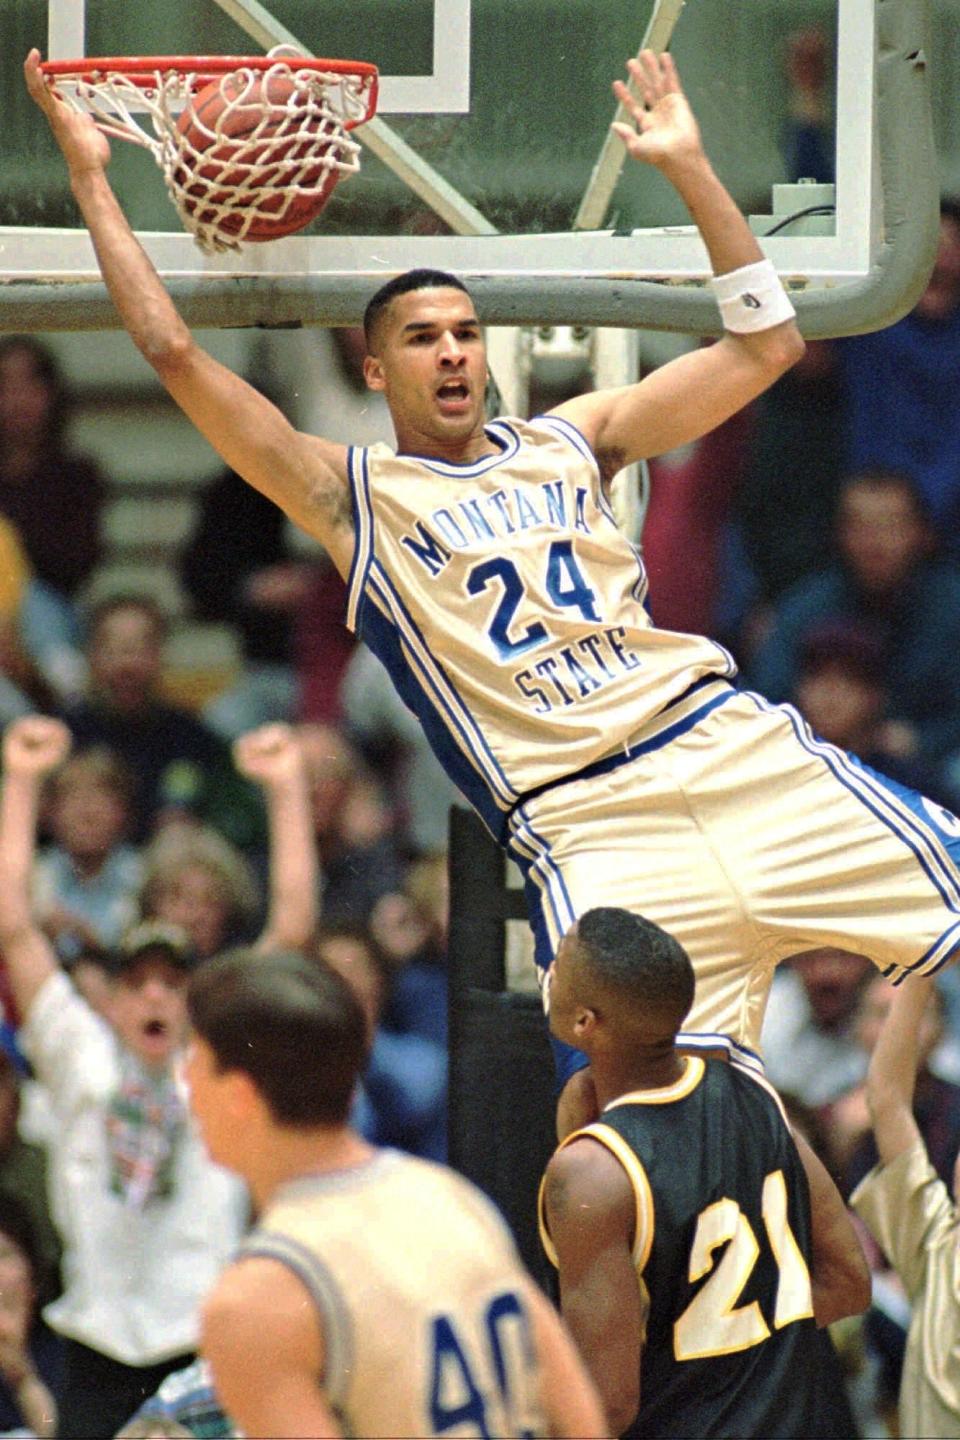 New Mavericks president Nico Harrison played collegiately at Montana State and has been a Nike NBA representative since 2002.